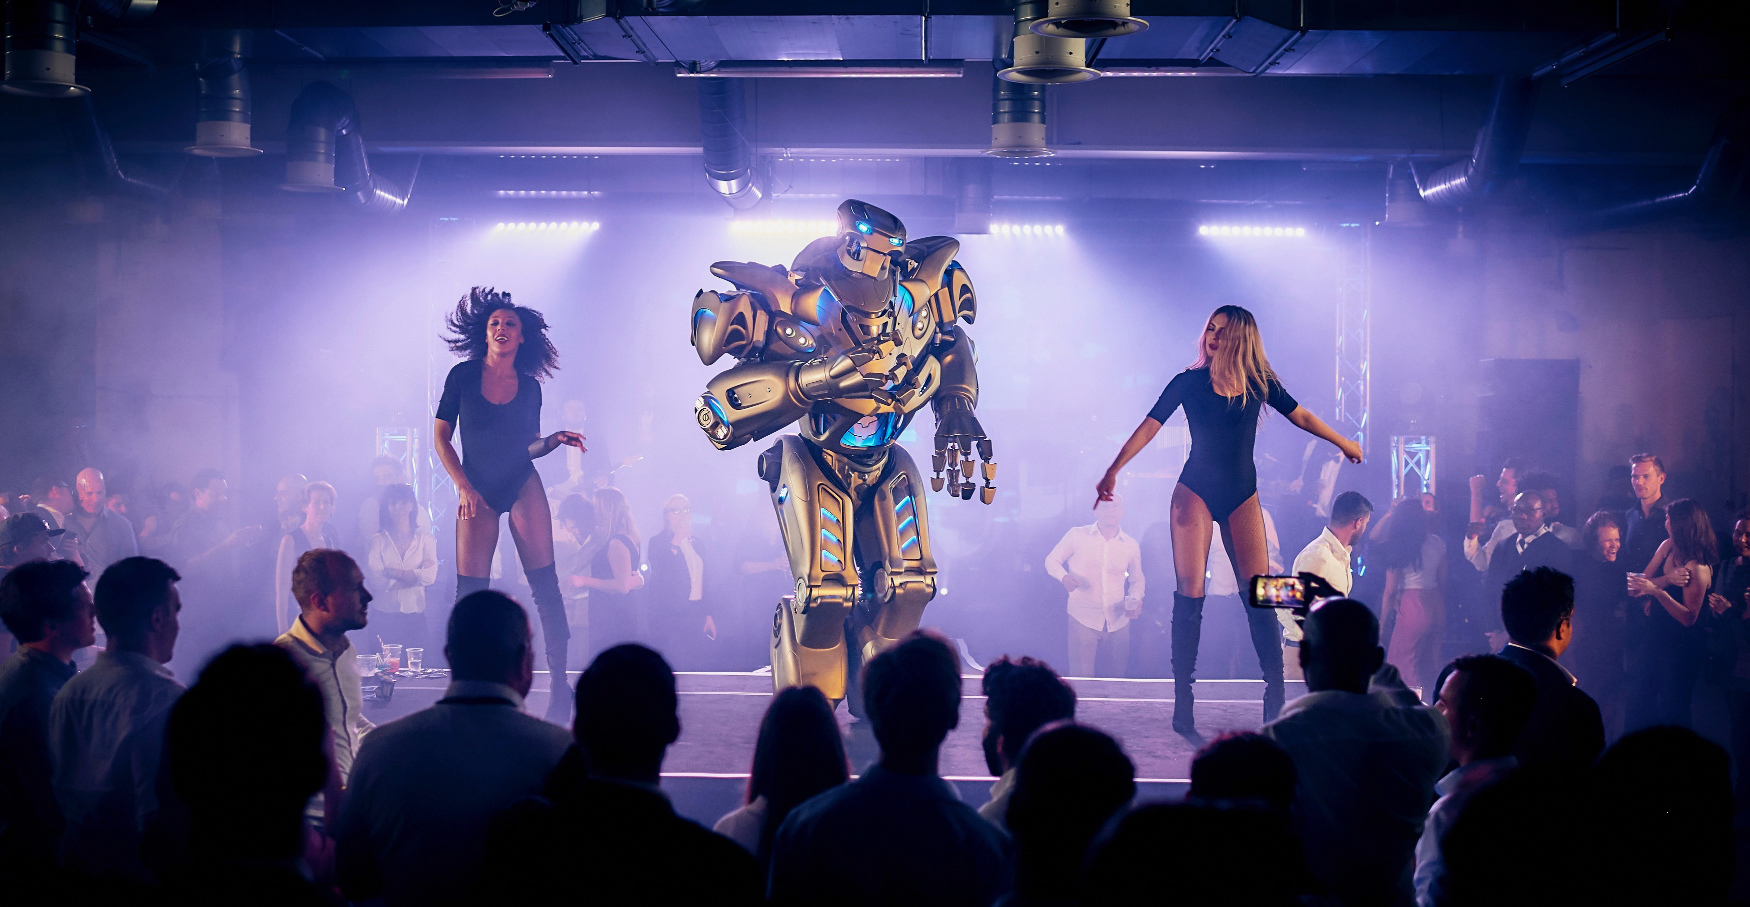 Titan the Robot dances on stage at a corporate event at the Oval Cricket Ground.